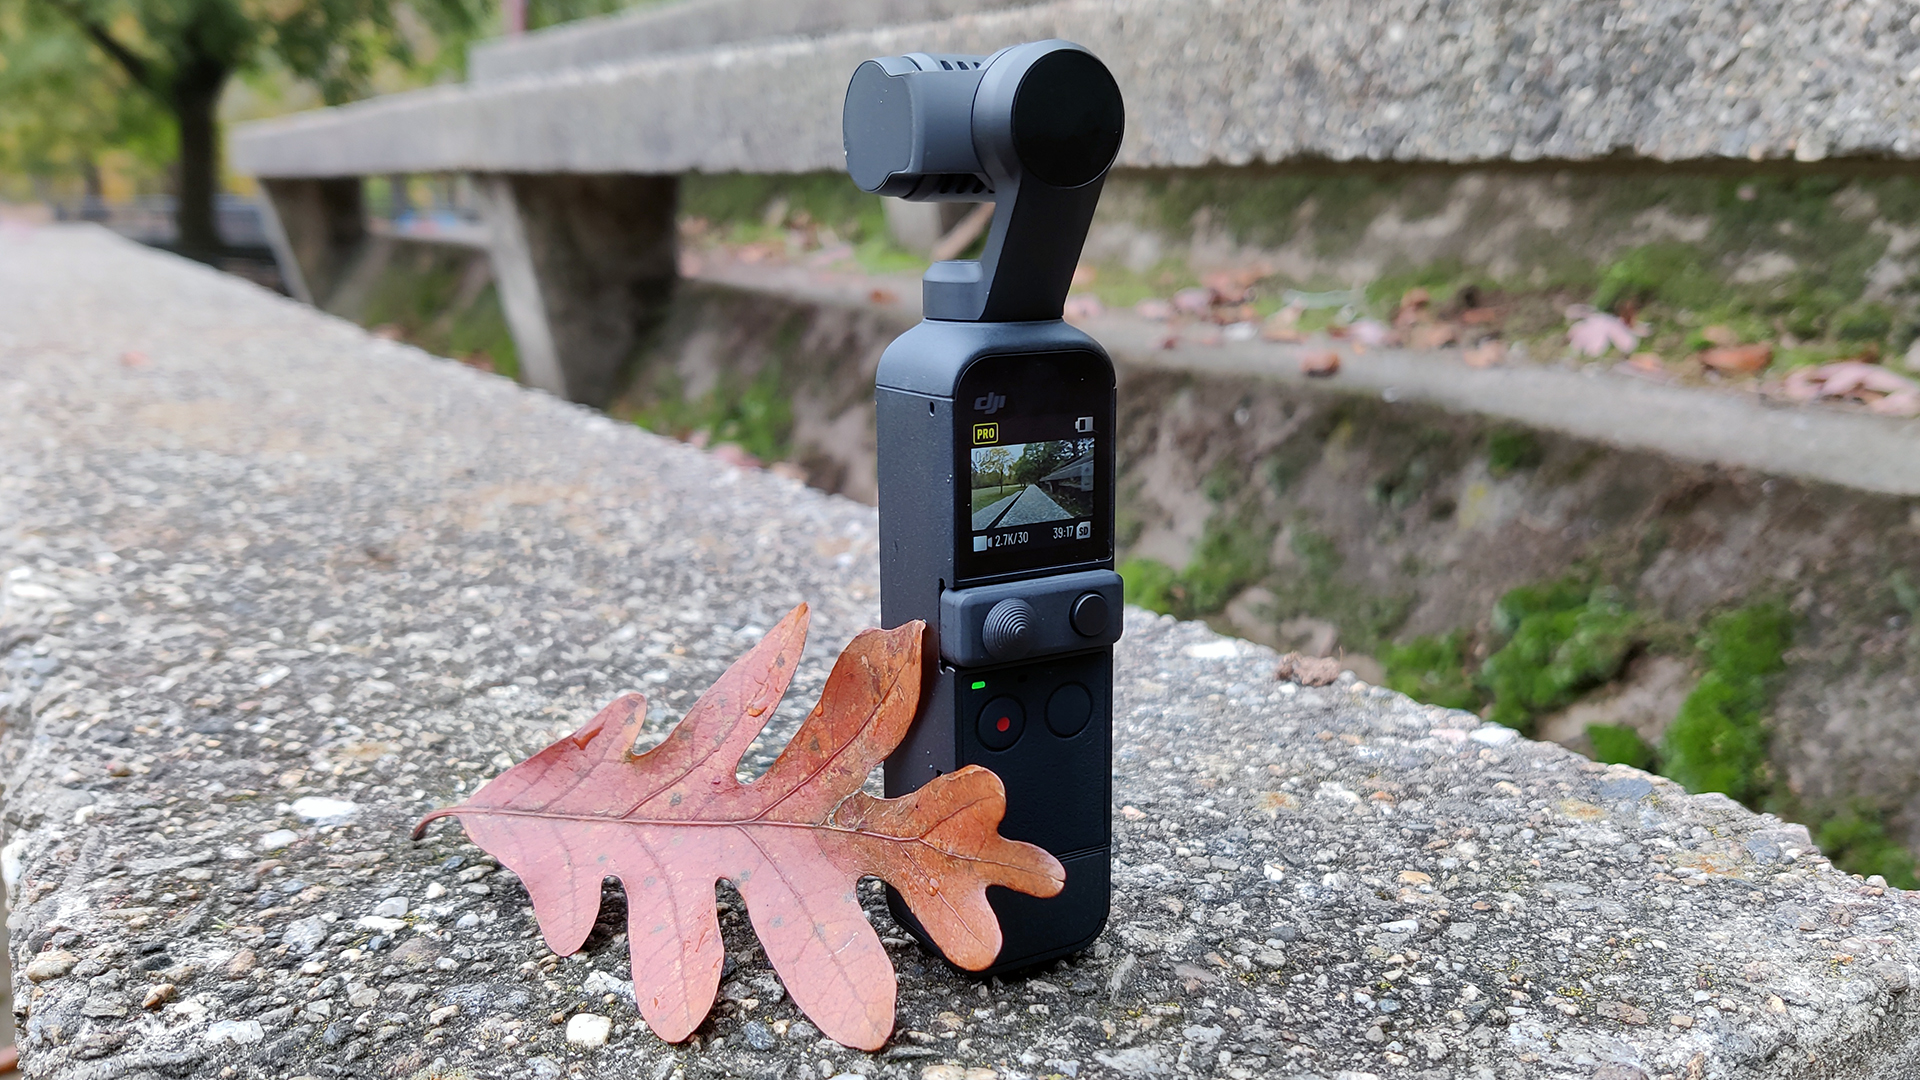 DJI Pocket 2 Review Standing alone front